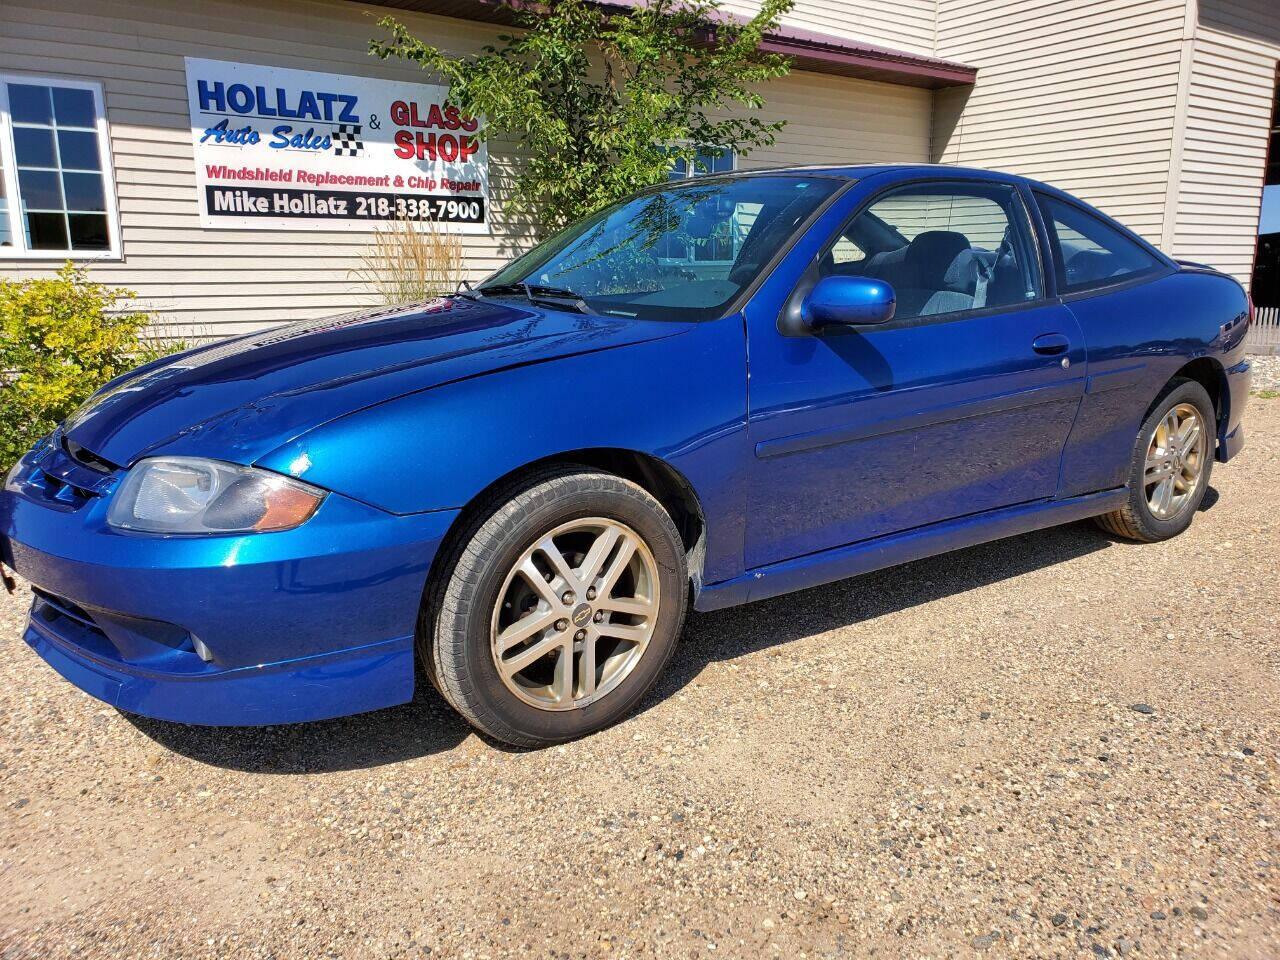 used 2004 chevrolet cavalier for sale carsforsale com used 2004 chevrolet cavalier for sale